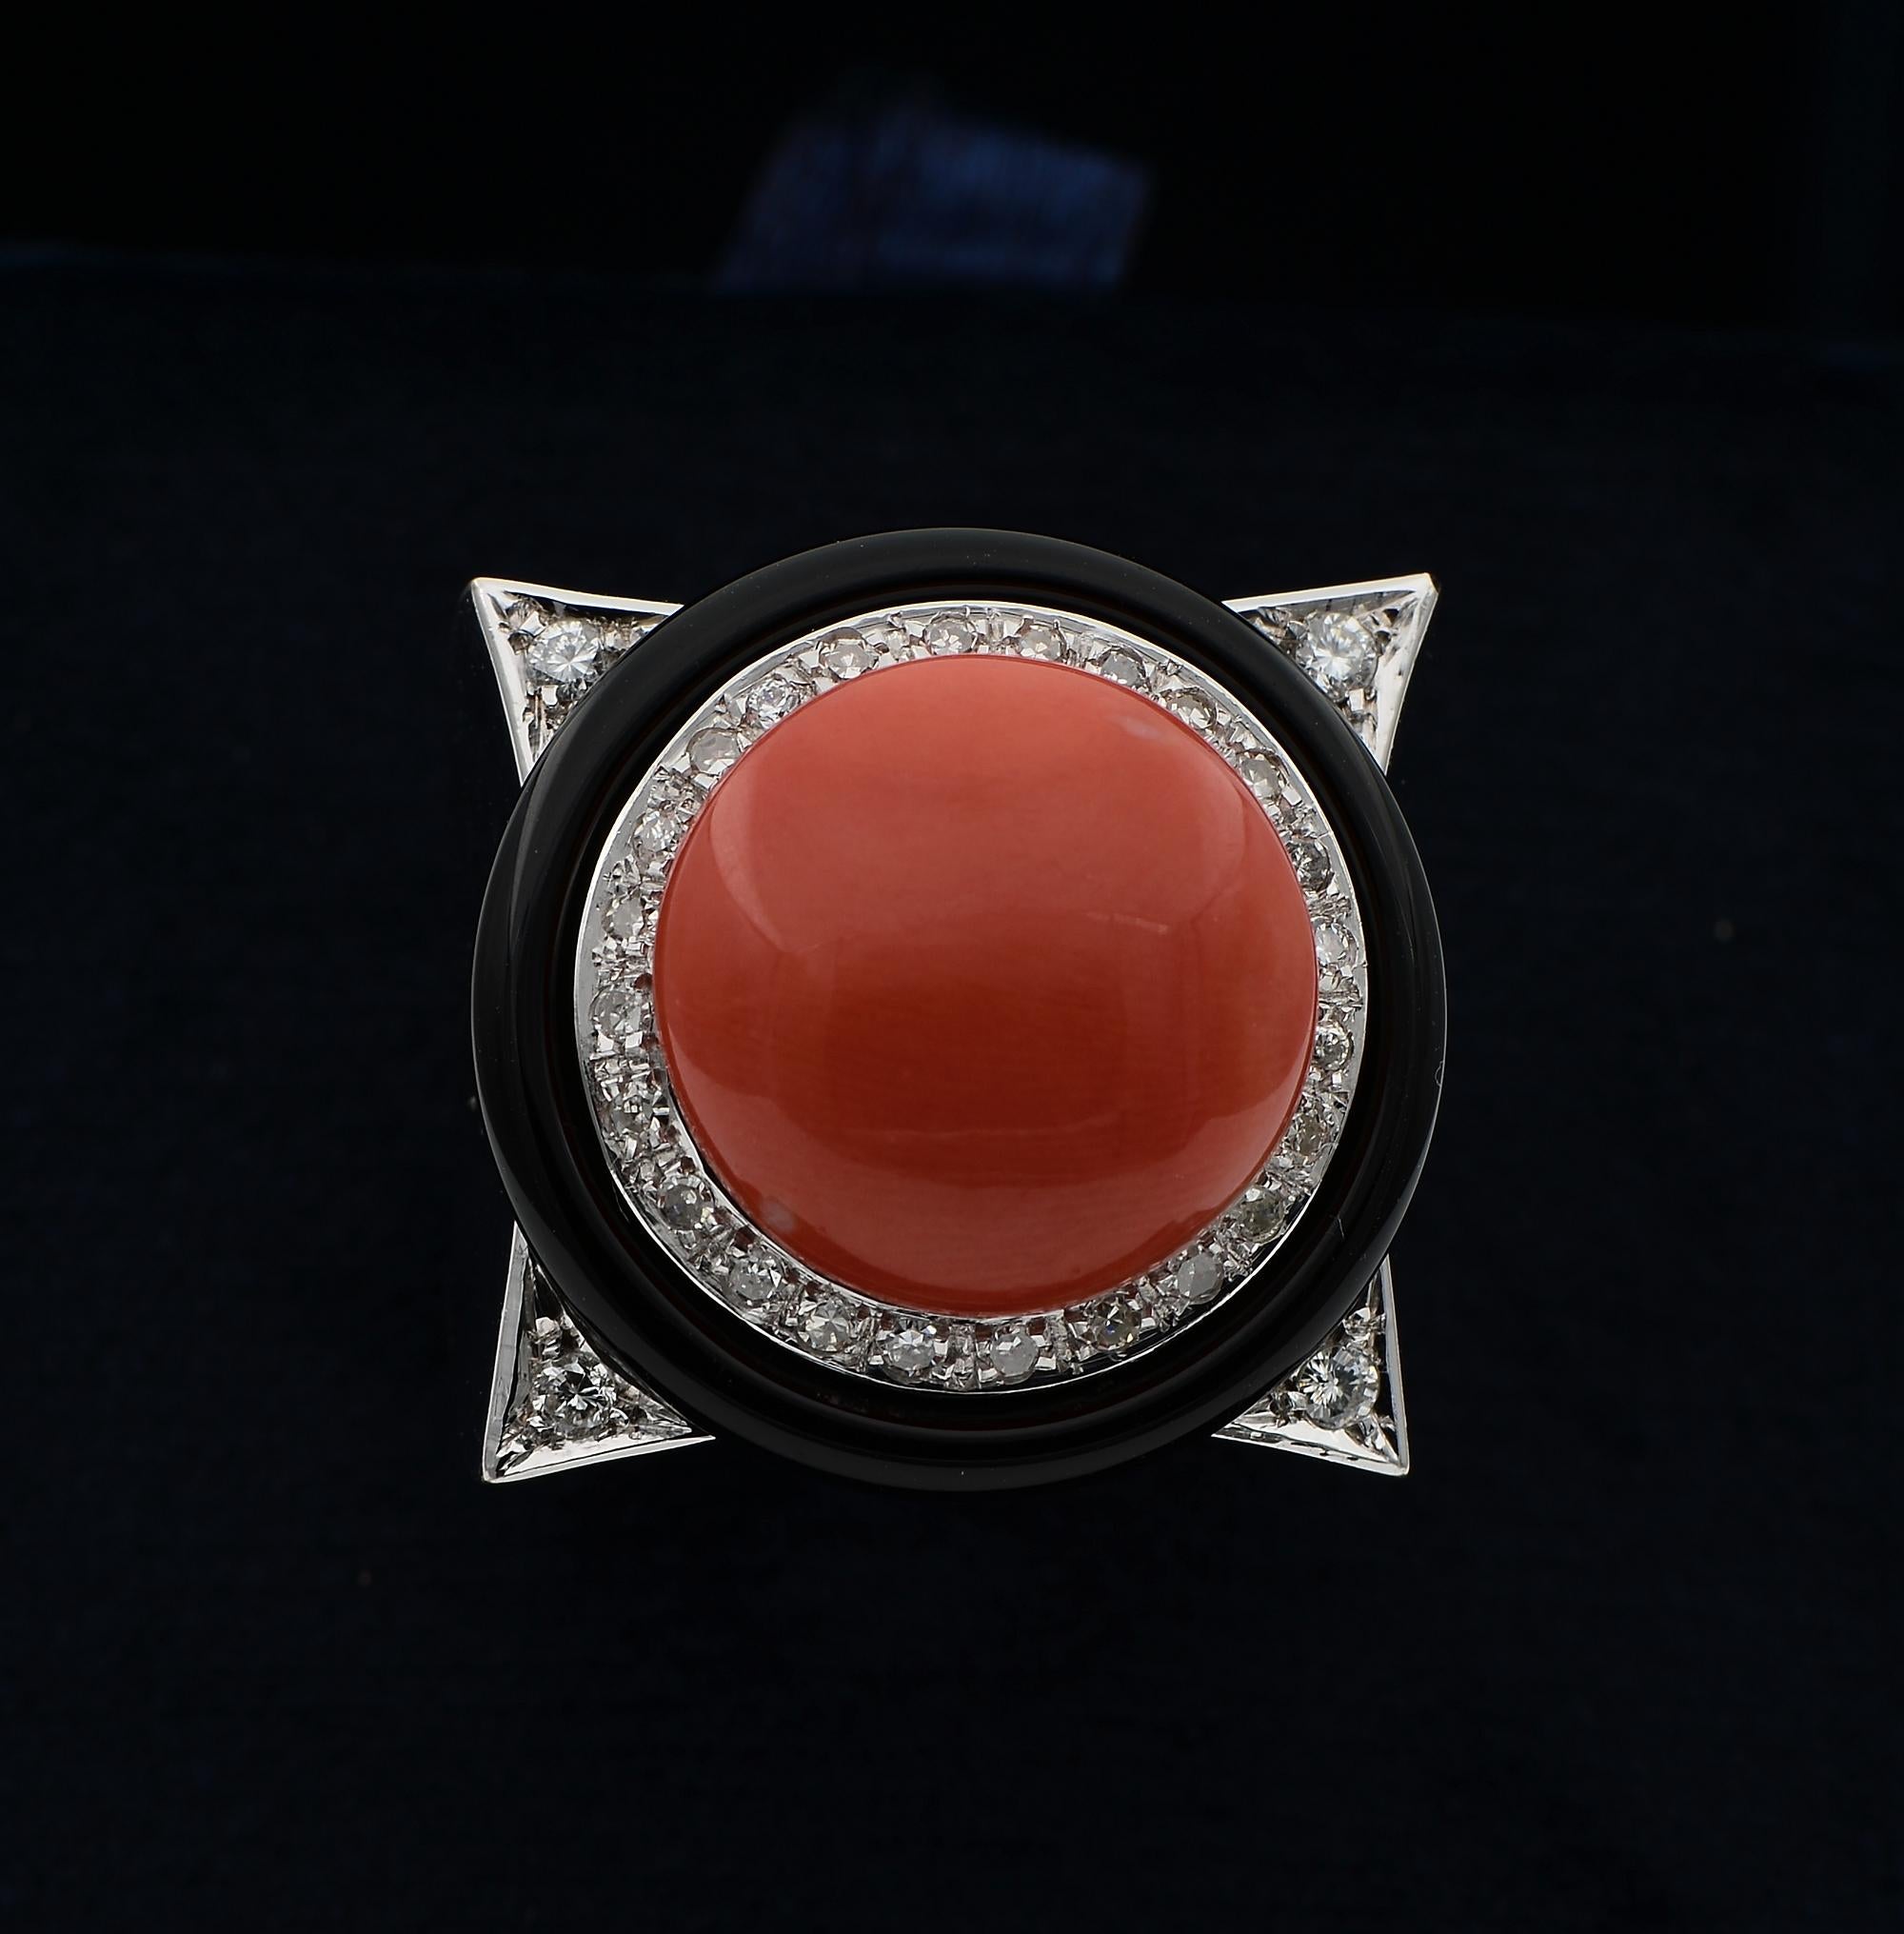 Ultra Chic
The most beloved combination between Black Onyx Diamond and warm Coral colour comes in this artful combination hand created in shining 18 Kt white gold (marked), strikingly dramatic in design
The squarish crown is set with a round